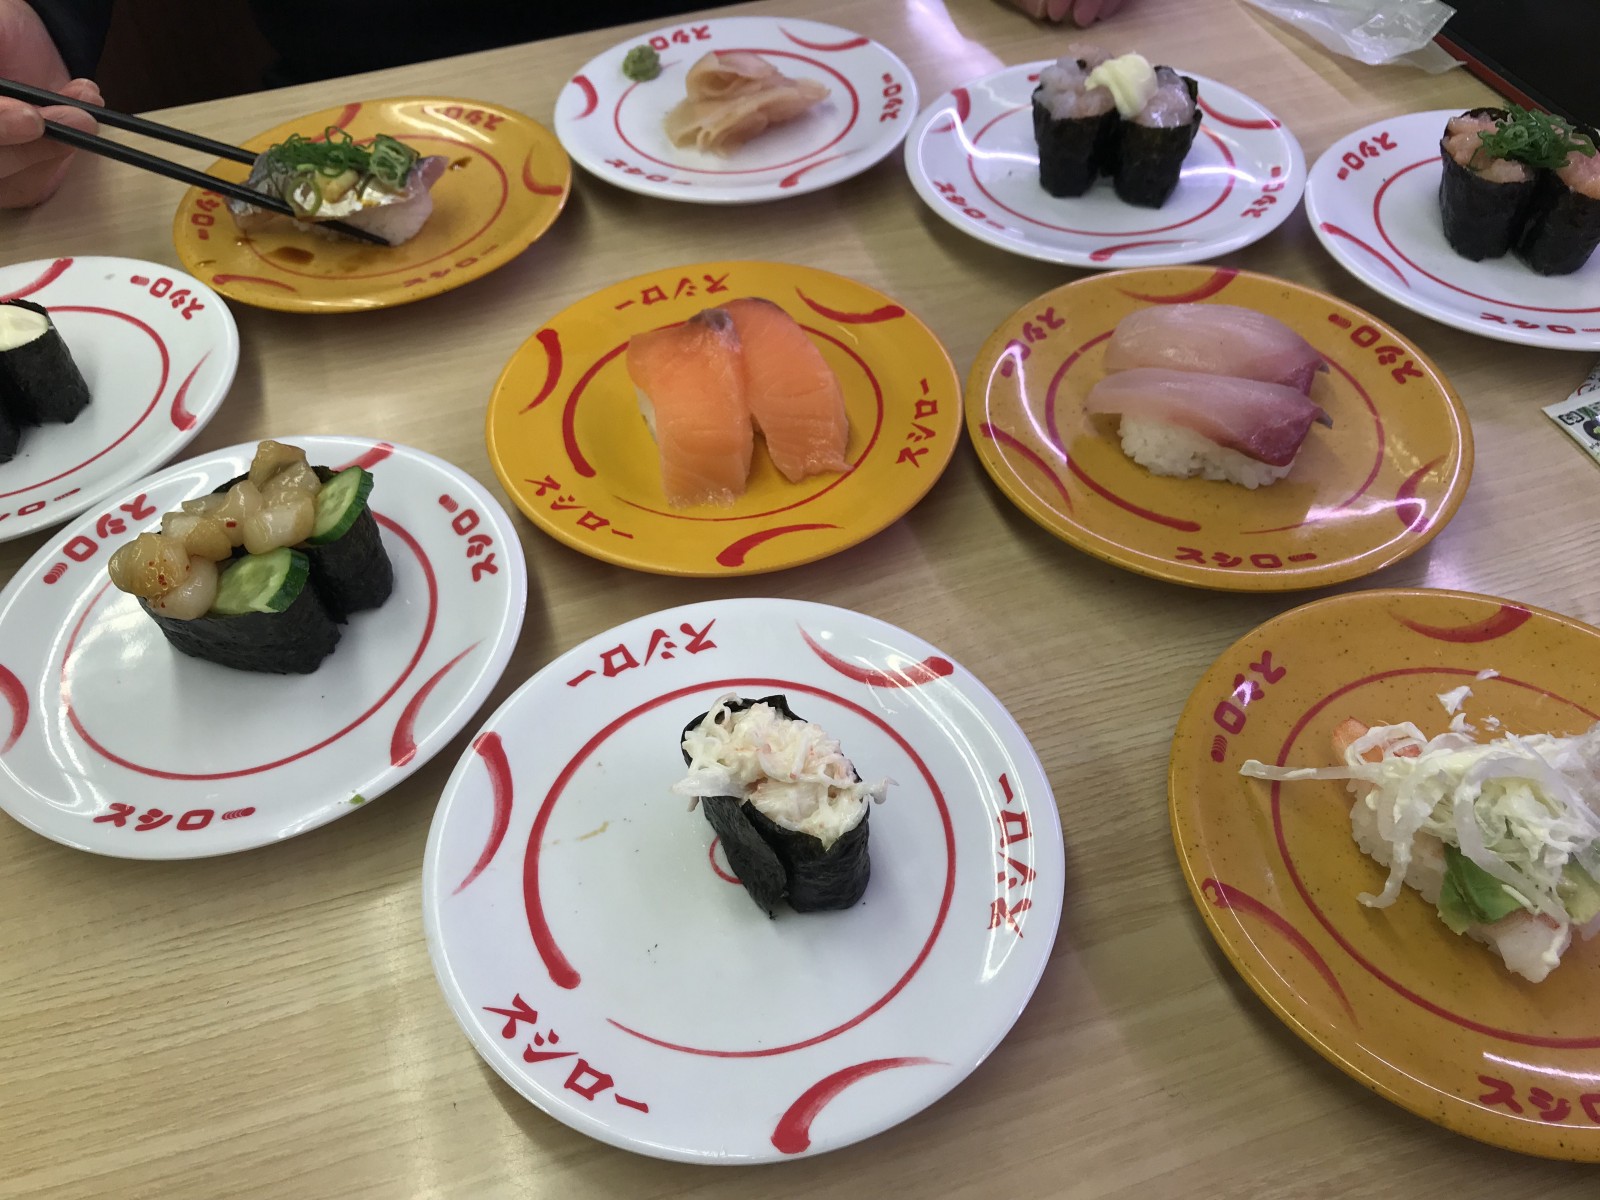 A wide variety of Sushi at Sushiro